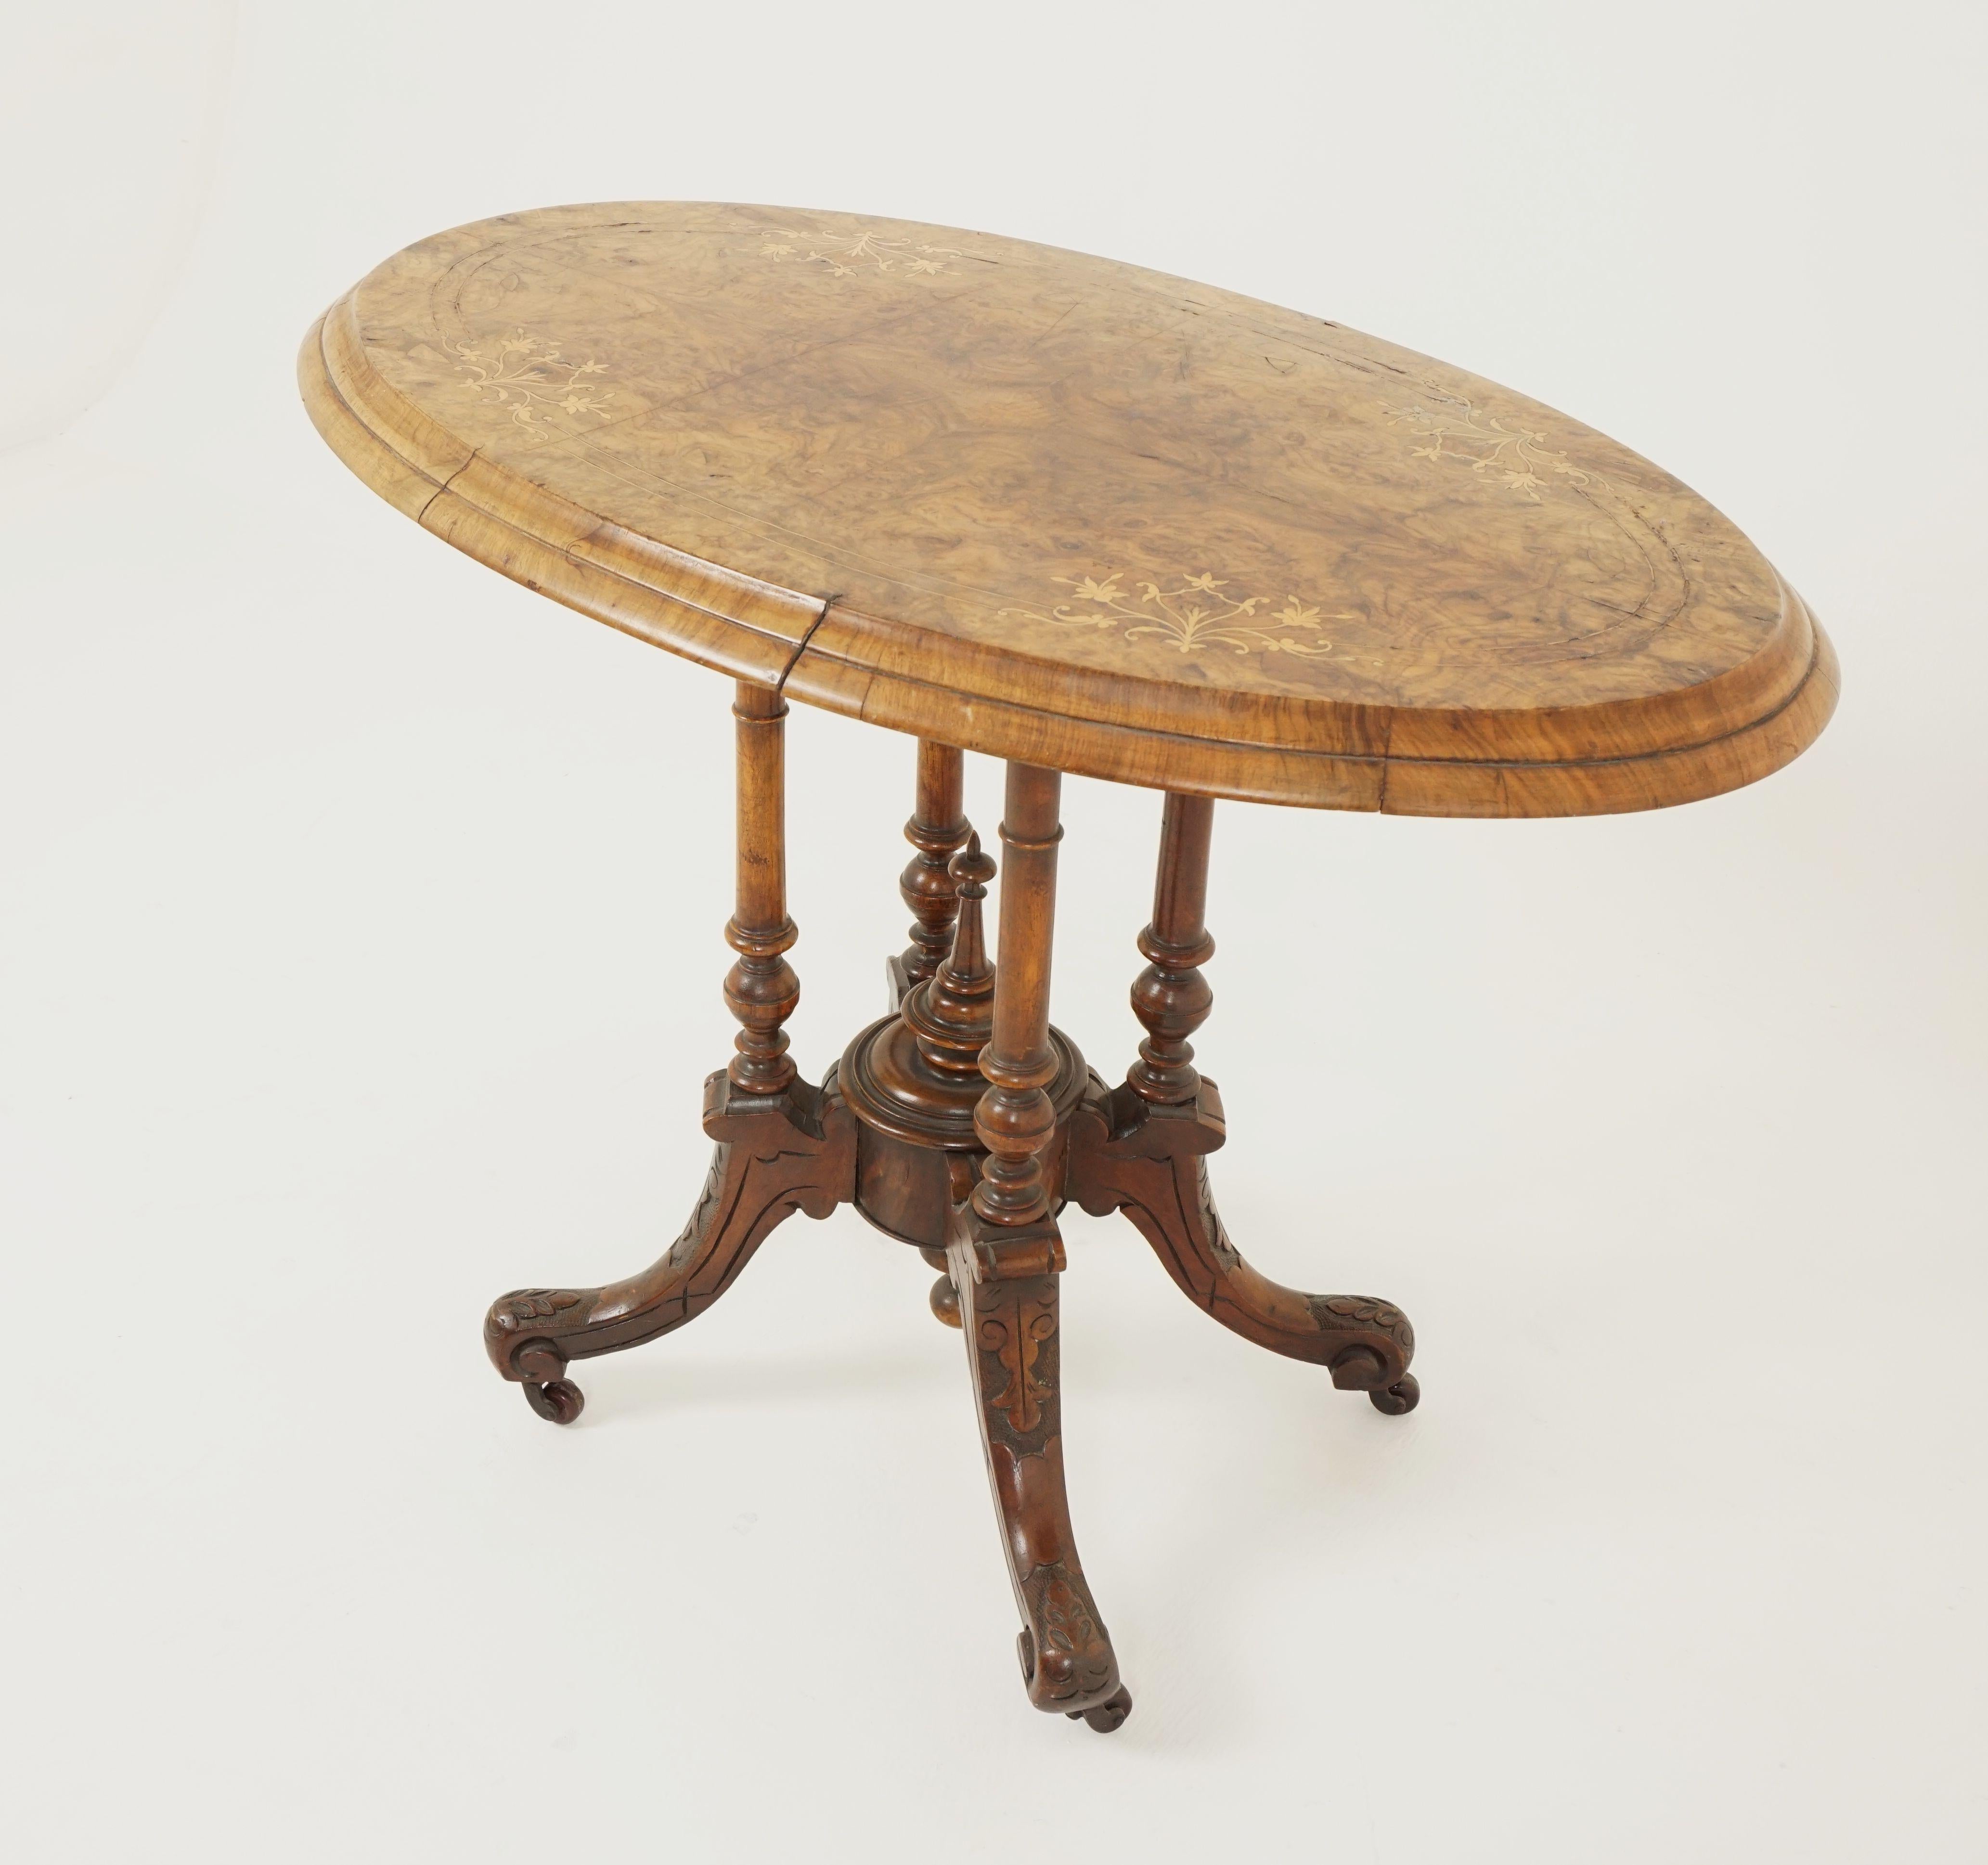 Antique Victorian table, walnut oval center table, Scotland 1870, H580

Scotland 1870
Solid walnut + veneers
Original finish
With walnut inlaid oval top
The base has four splendid turned columns supported by four shaped carved cabriole legs
With